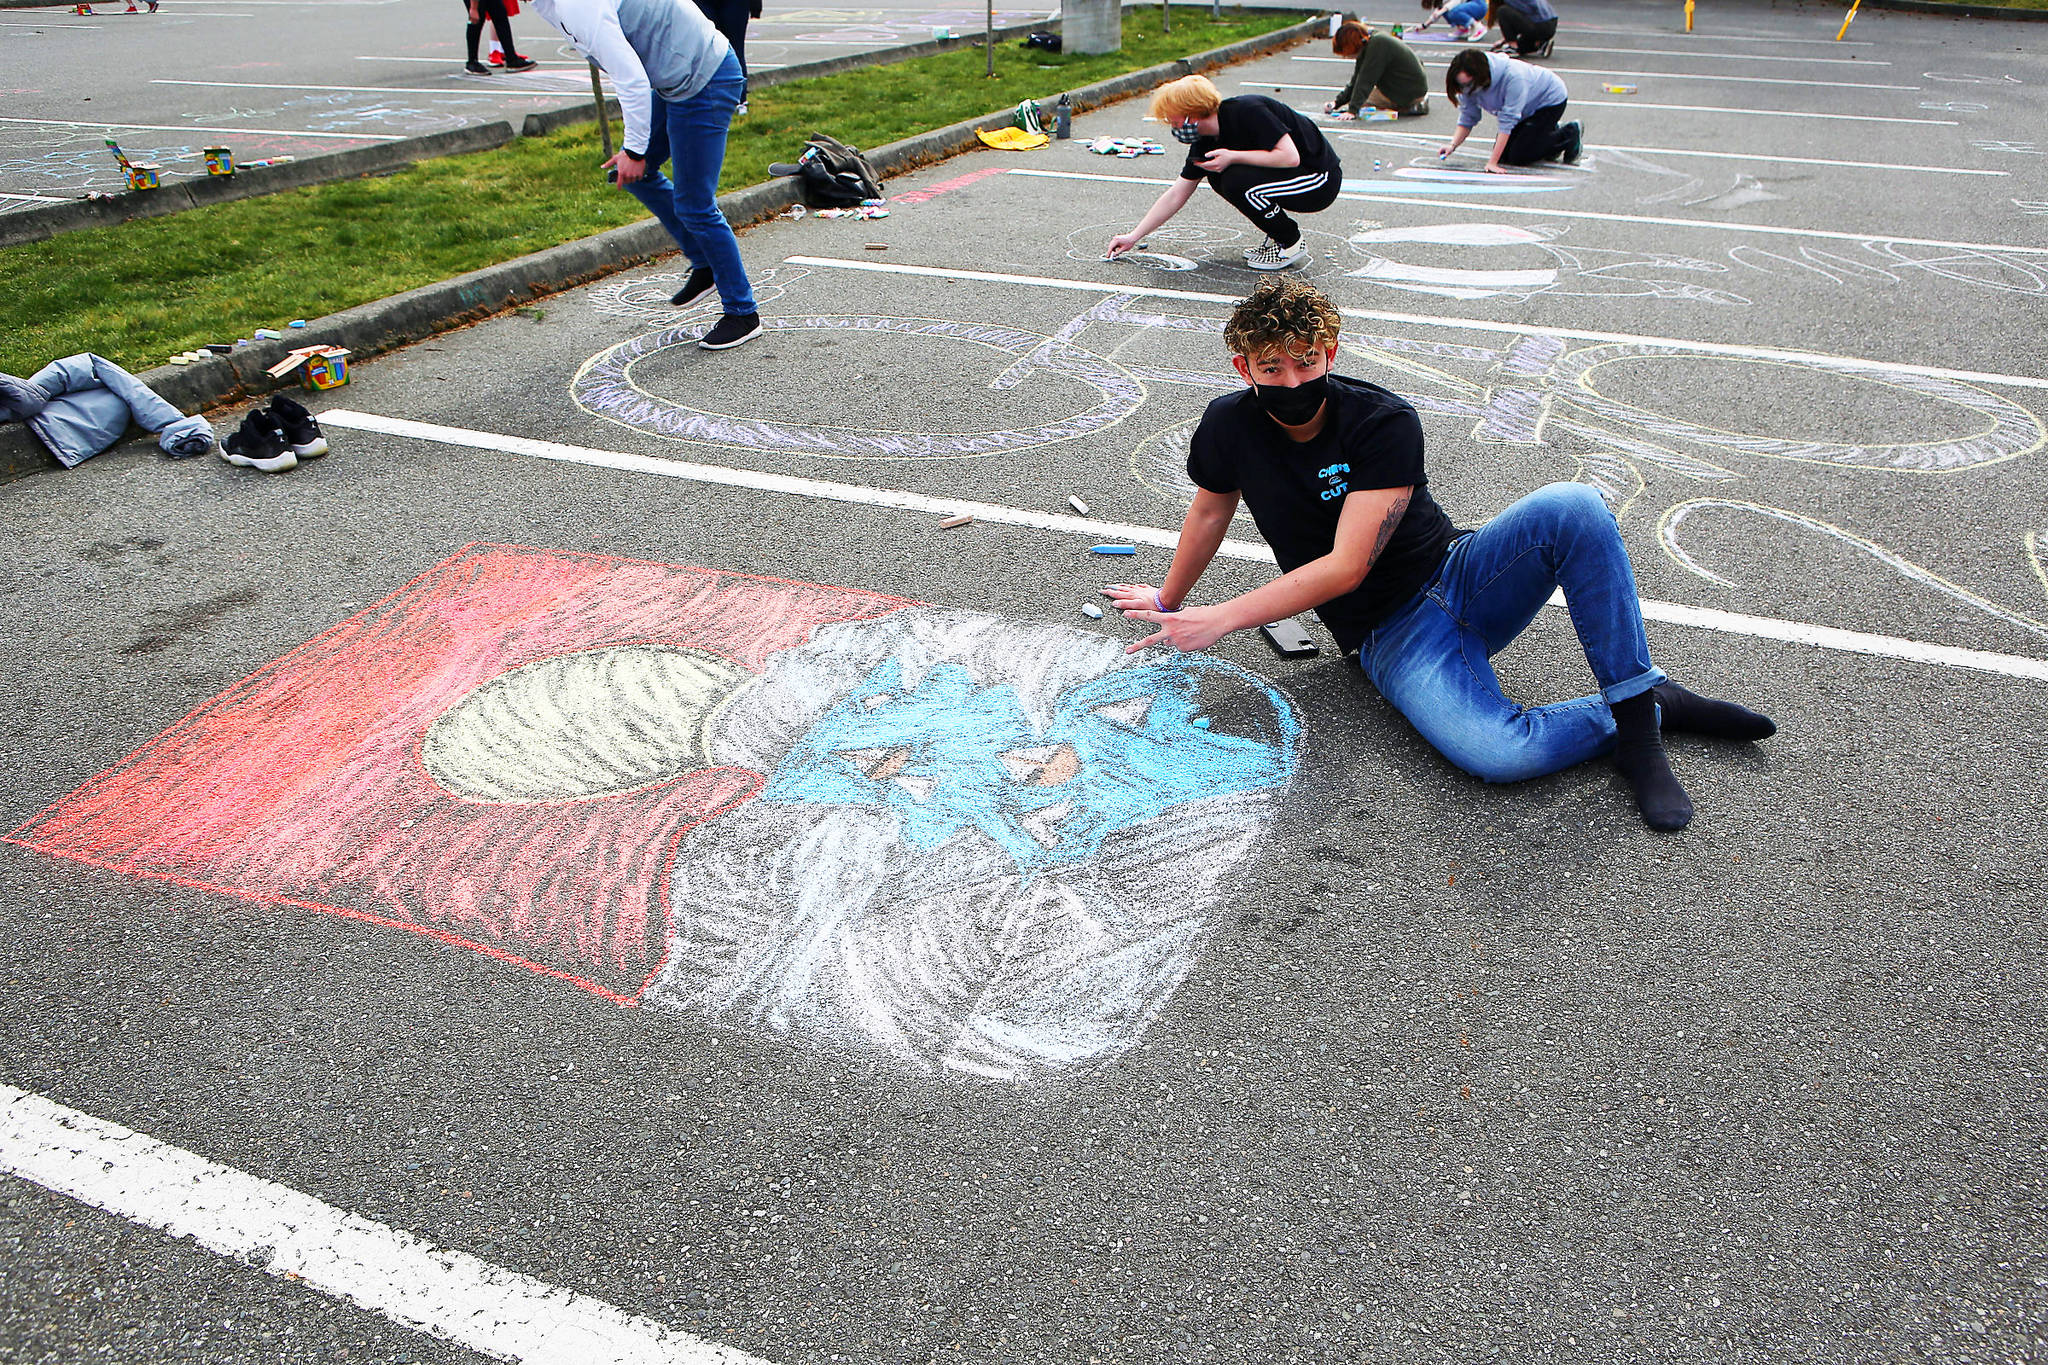 Photo by John Fisken
Christopher Hoppock was among 60 members of the Senior Class Council at Oak Harbor High School who took part in whimsical “Chalk It Up” fun and decorated the school parking lot. The event provided a “simple, intentional moment” for the class to get together safety and school officials predict it could be the start of a new tradition.